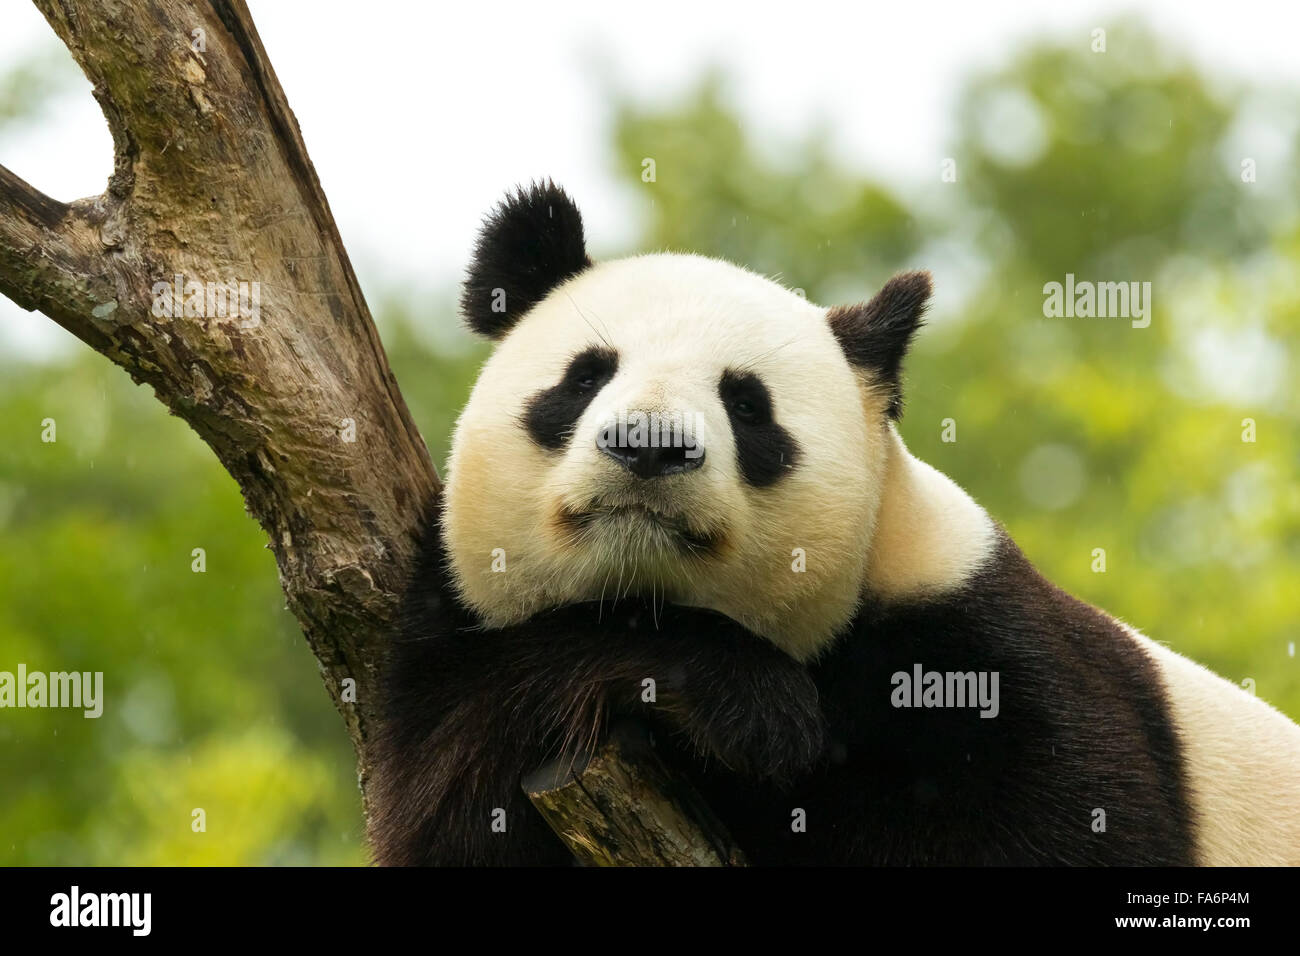 Giant panda bear falls asleep during the rain in a forest after eating bamboo Stock Photo